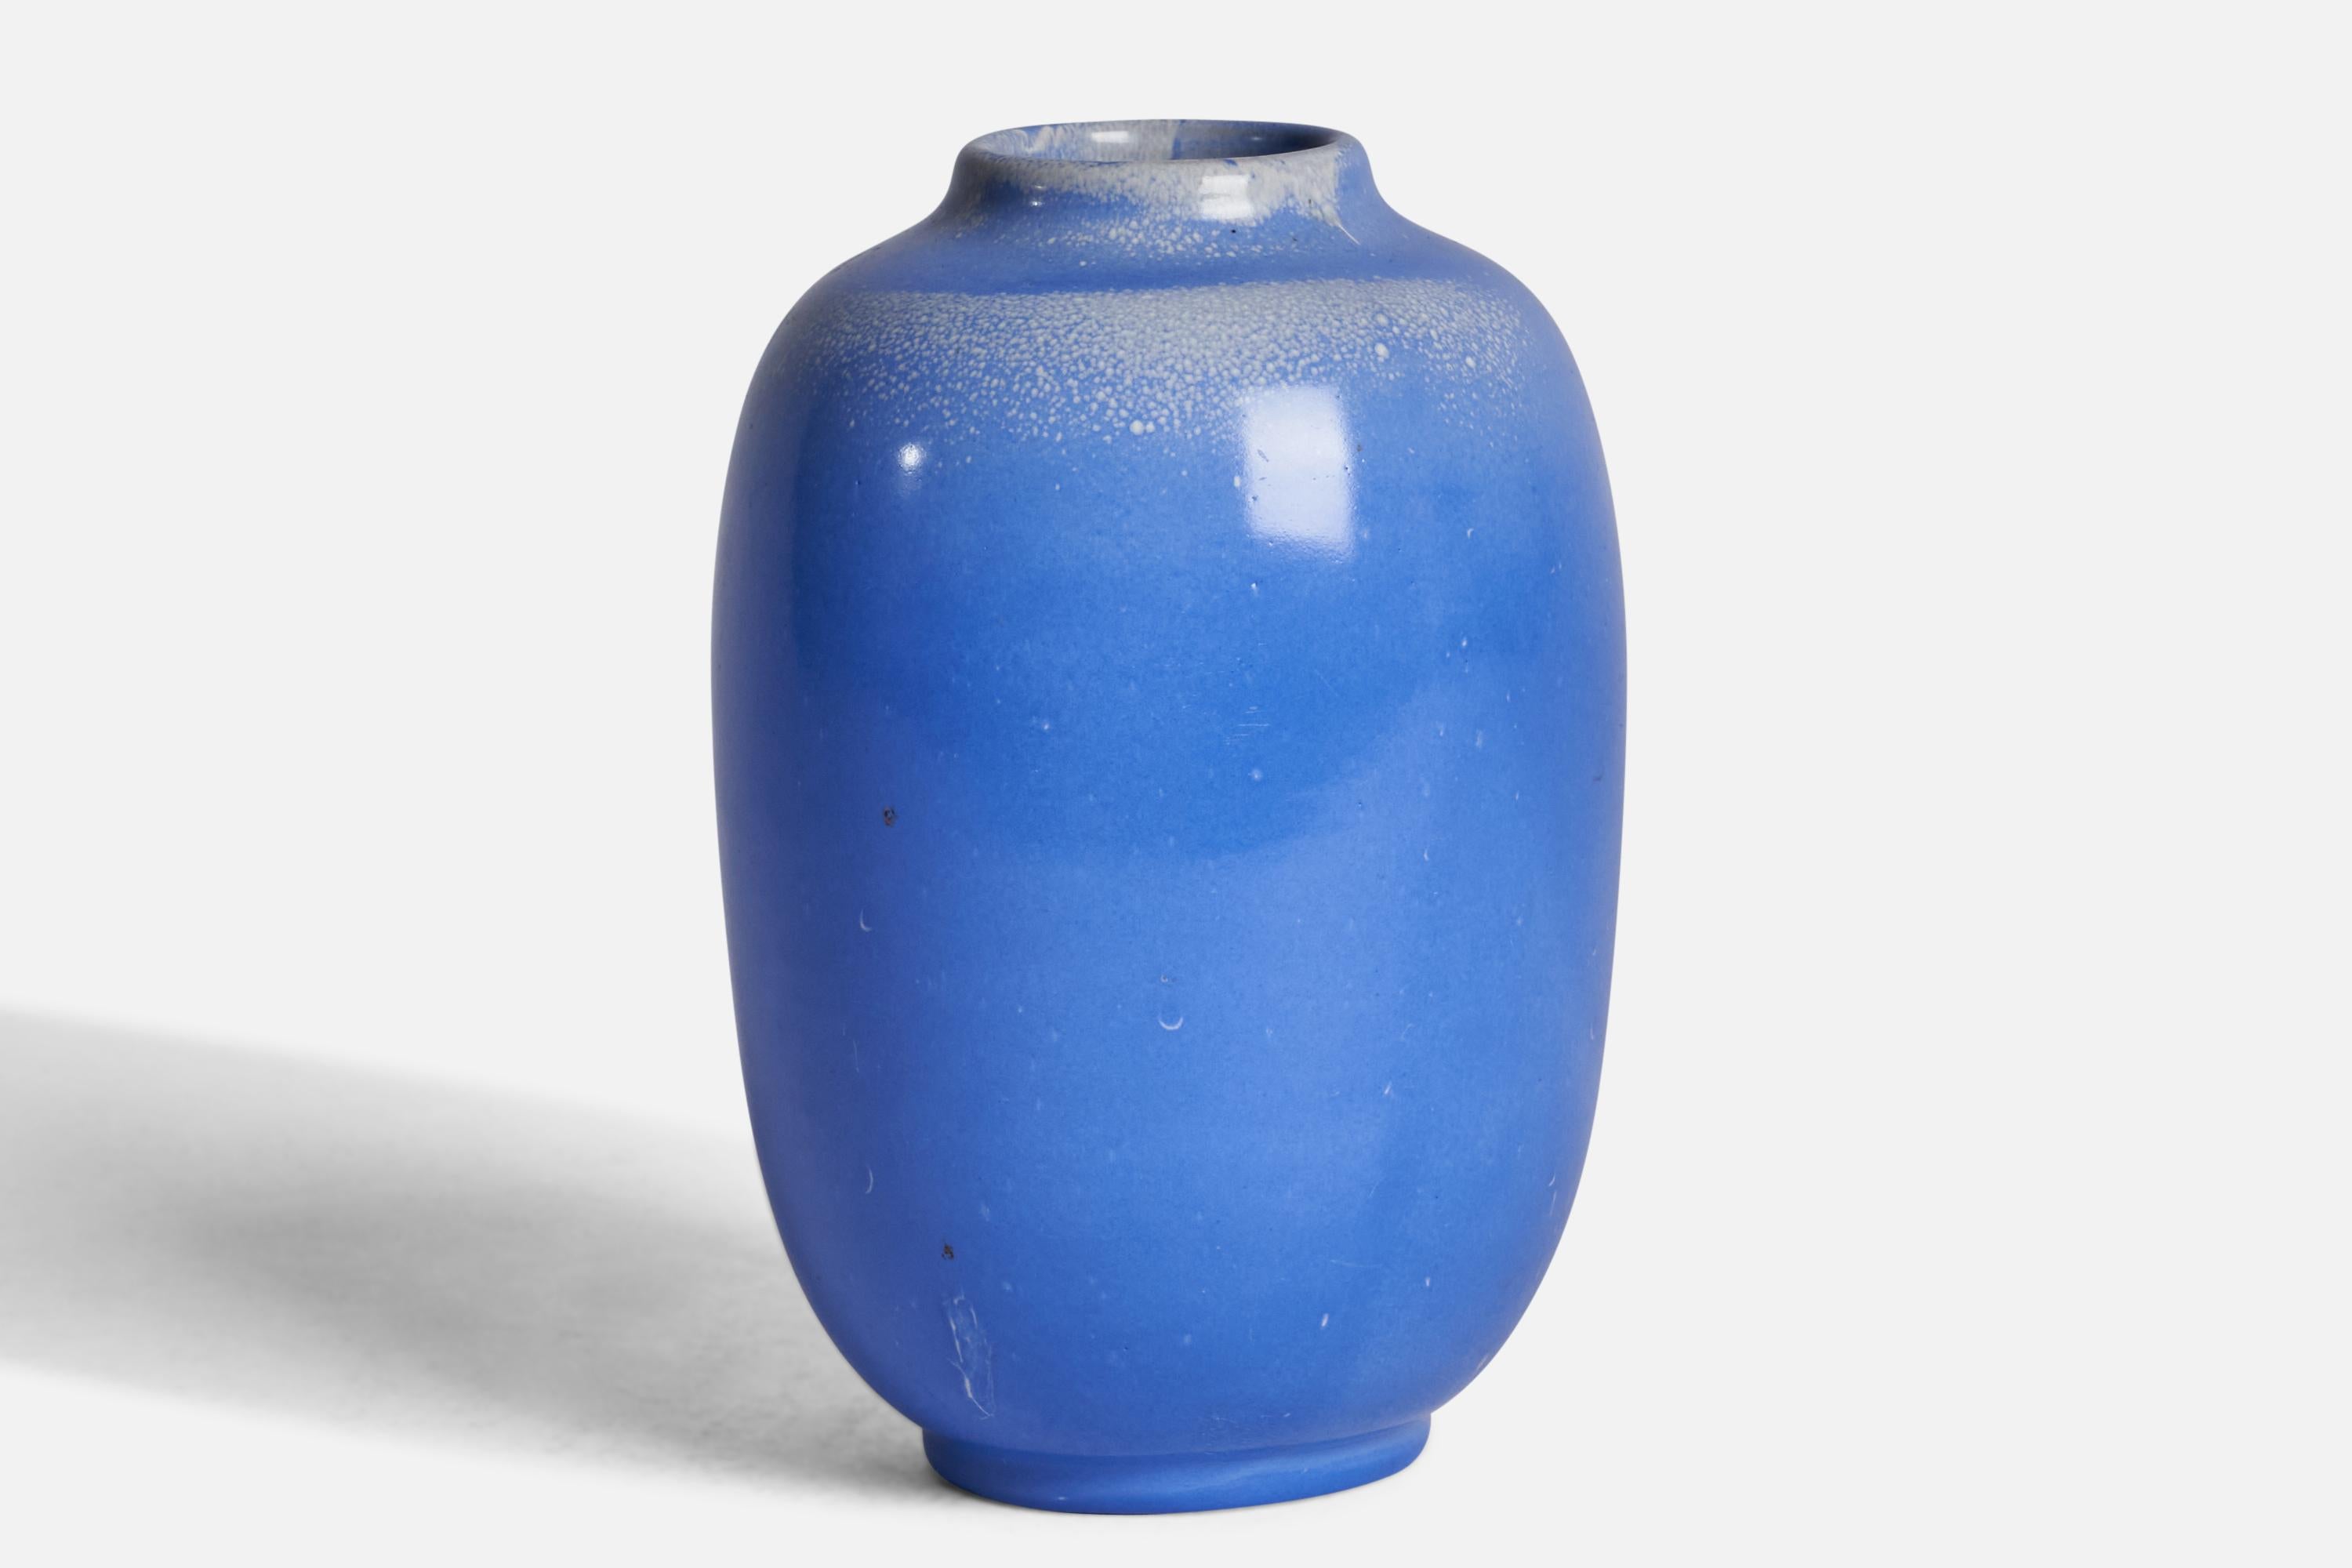 A blue-glazed earthenware vase designed by Anna-Lisa Thomson and produced by Upsala Ekeby, Sweden, 1930s.